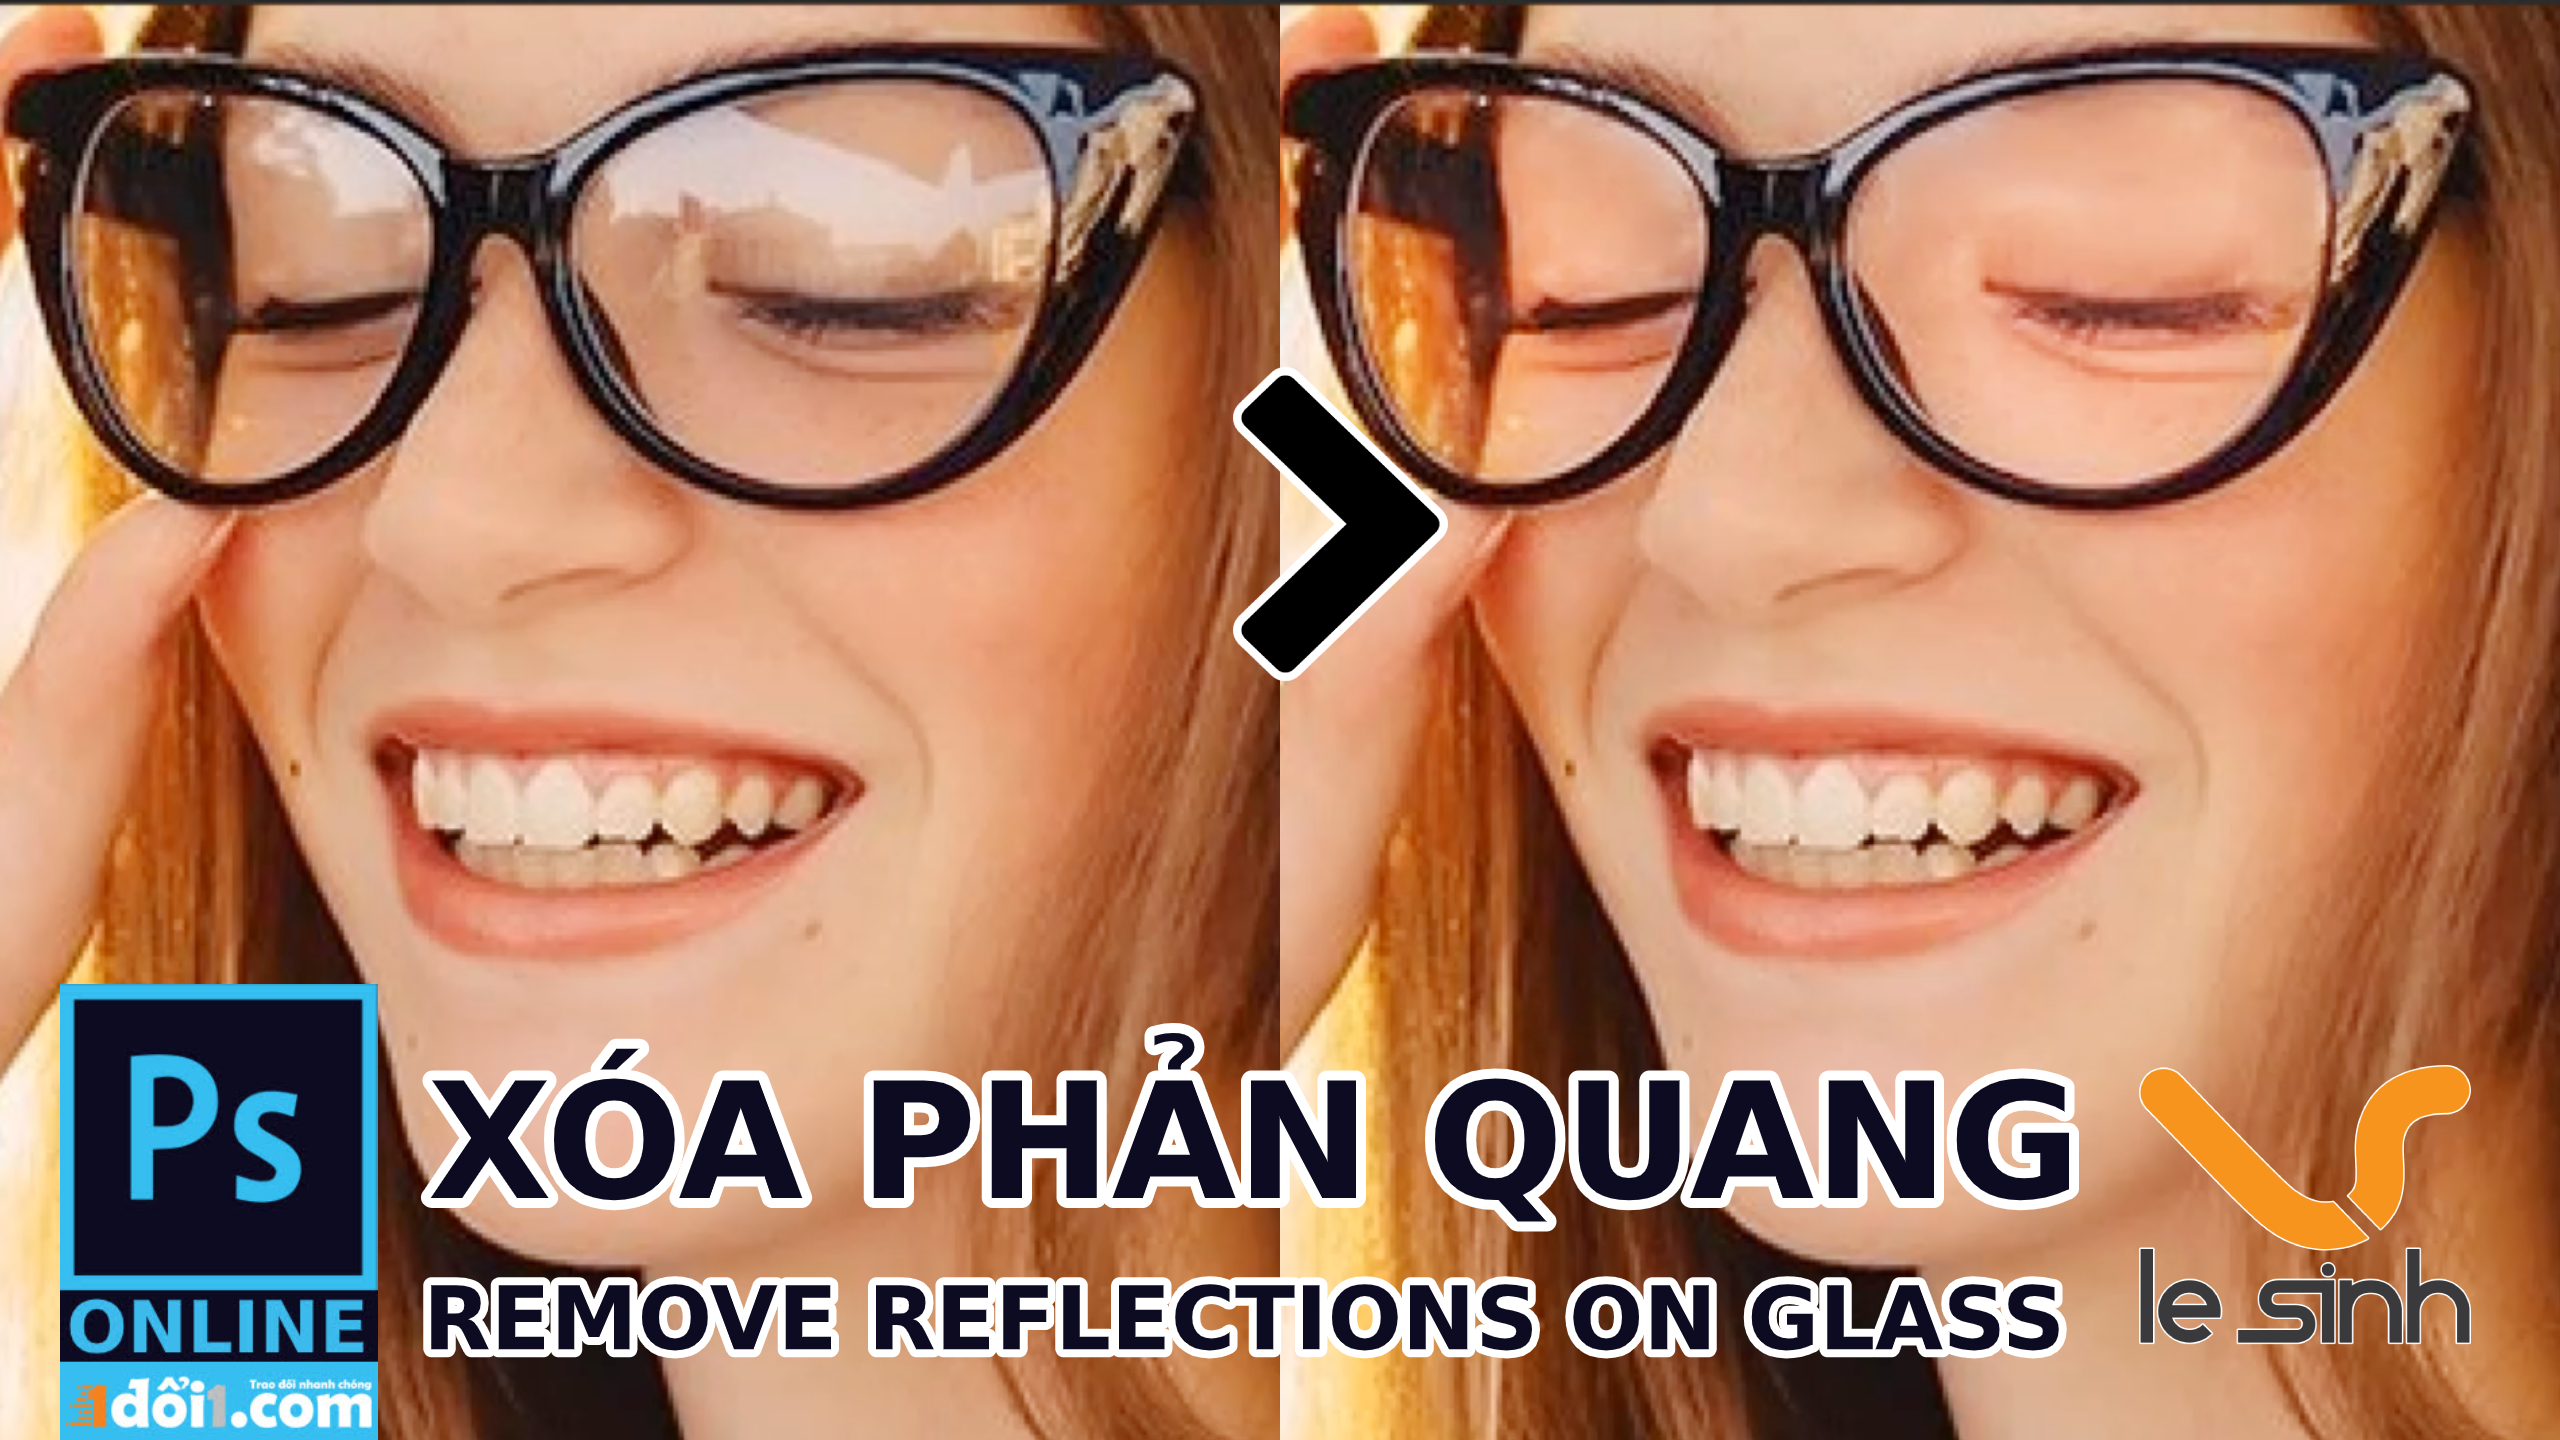 How to remove reflections on glass in photoshop online